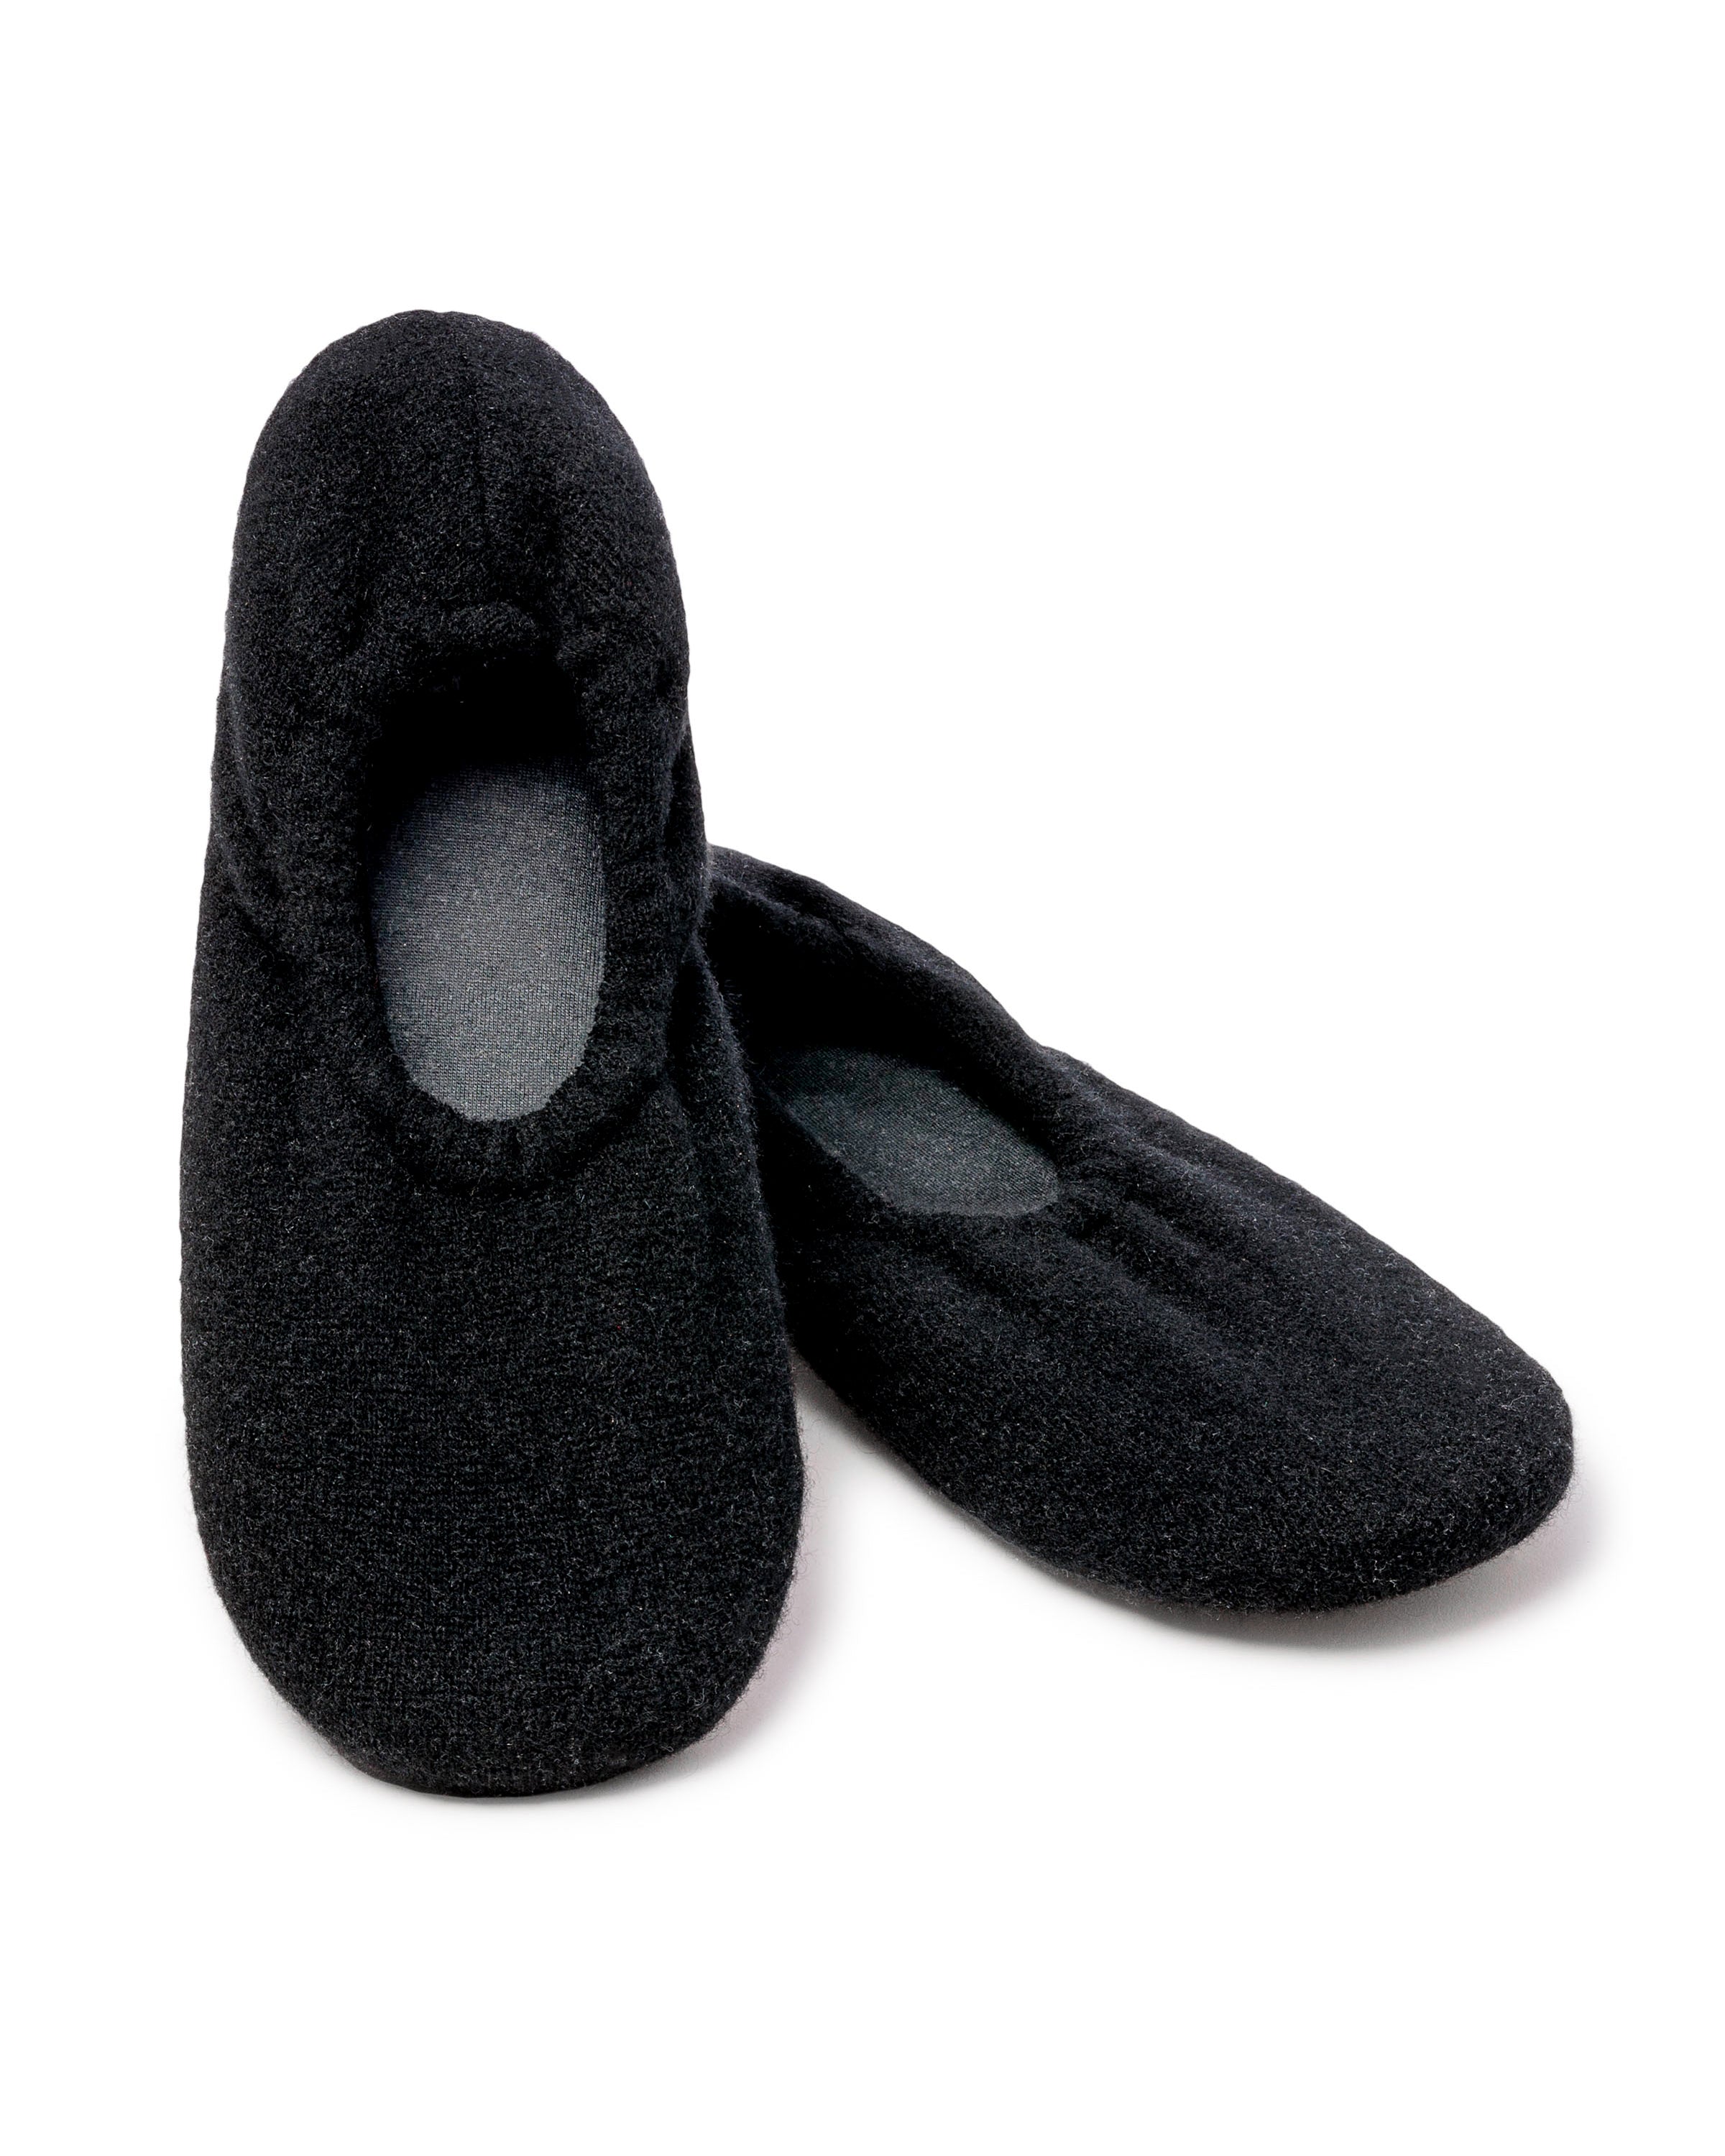 Women's Cashmere Slippers in Black